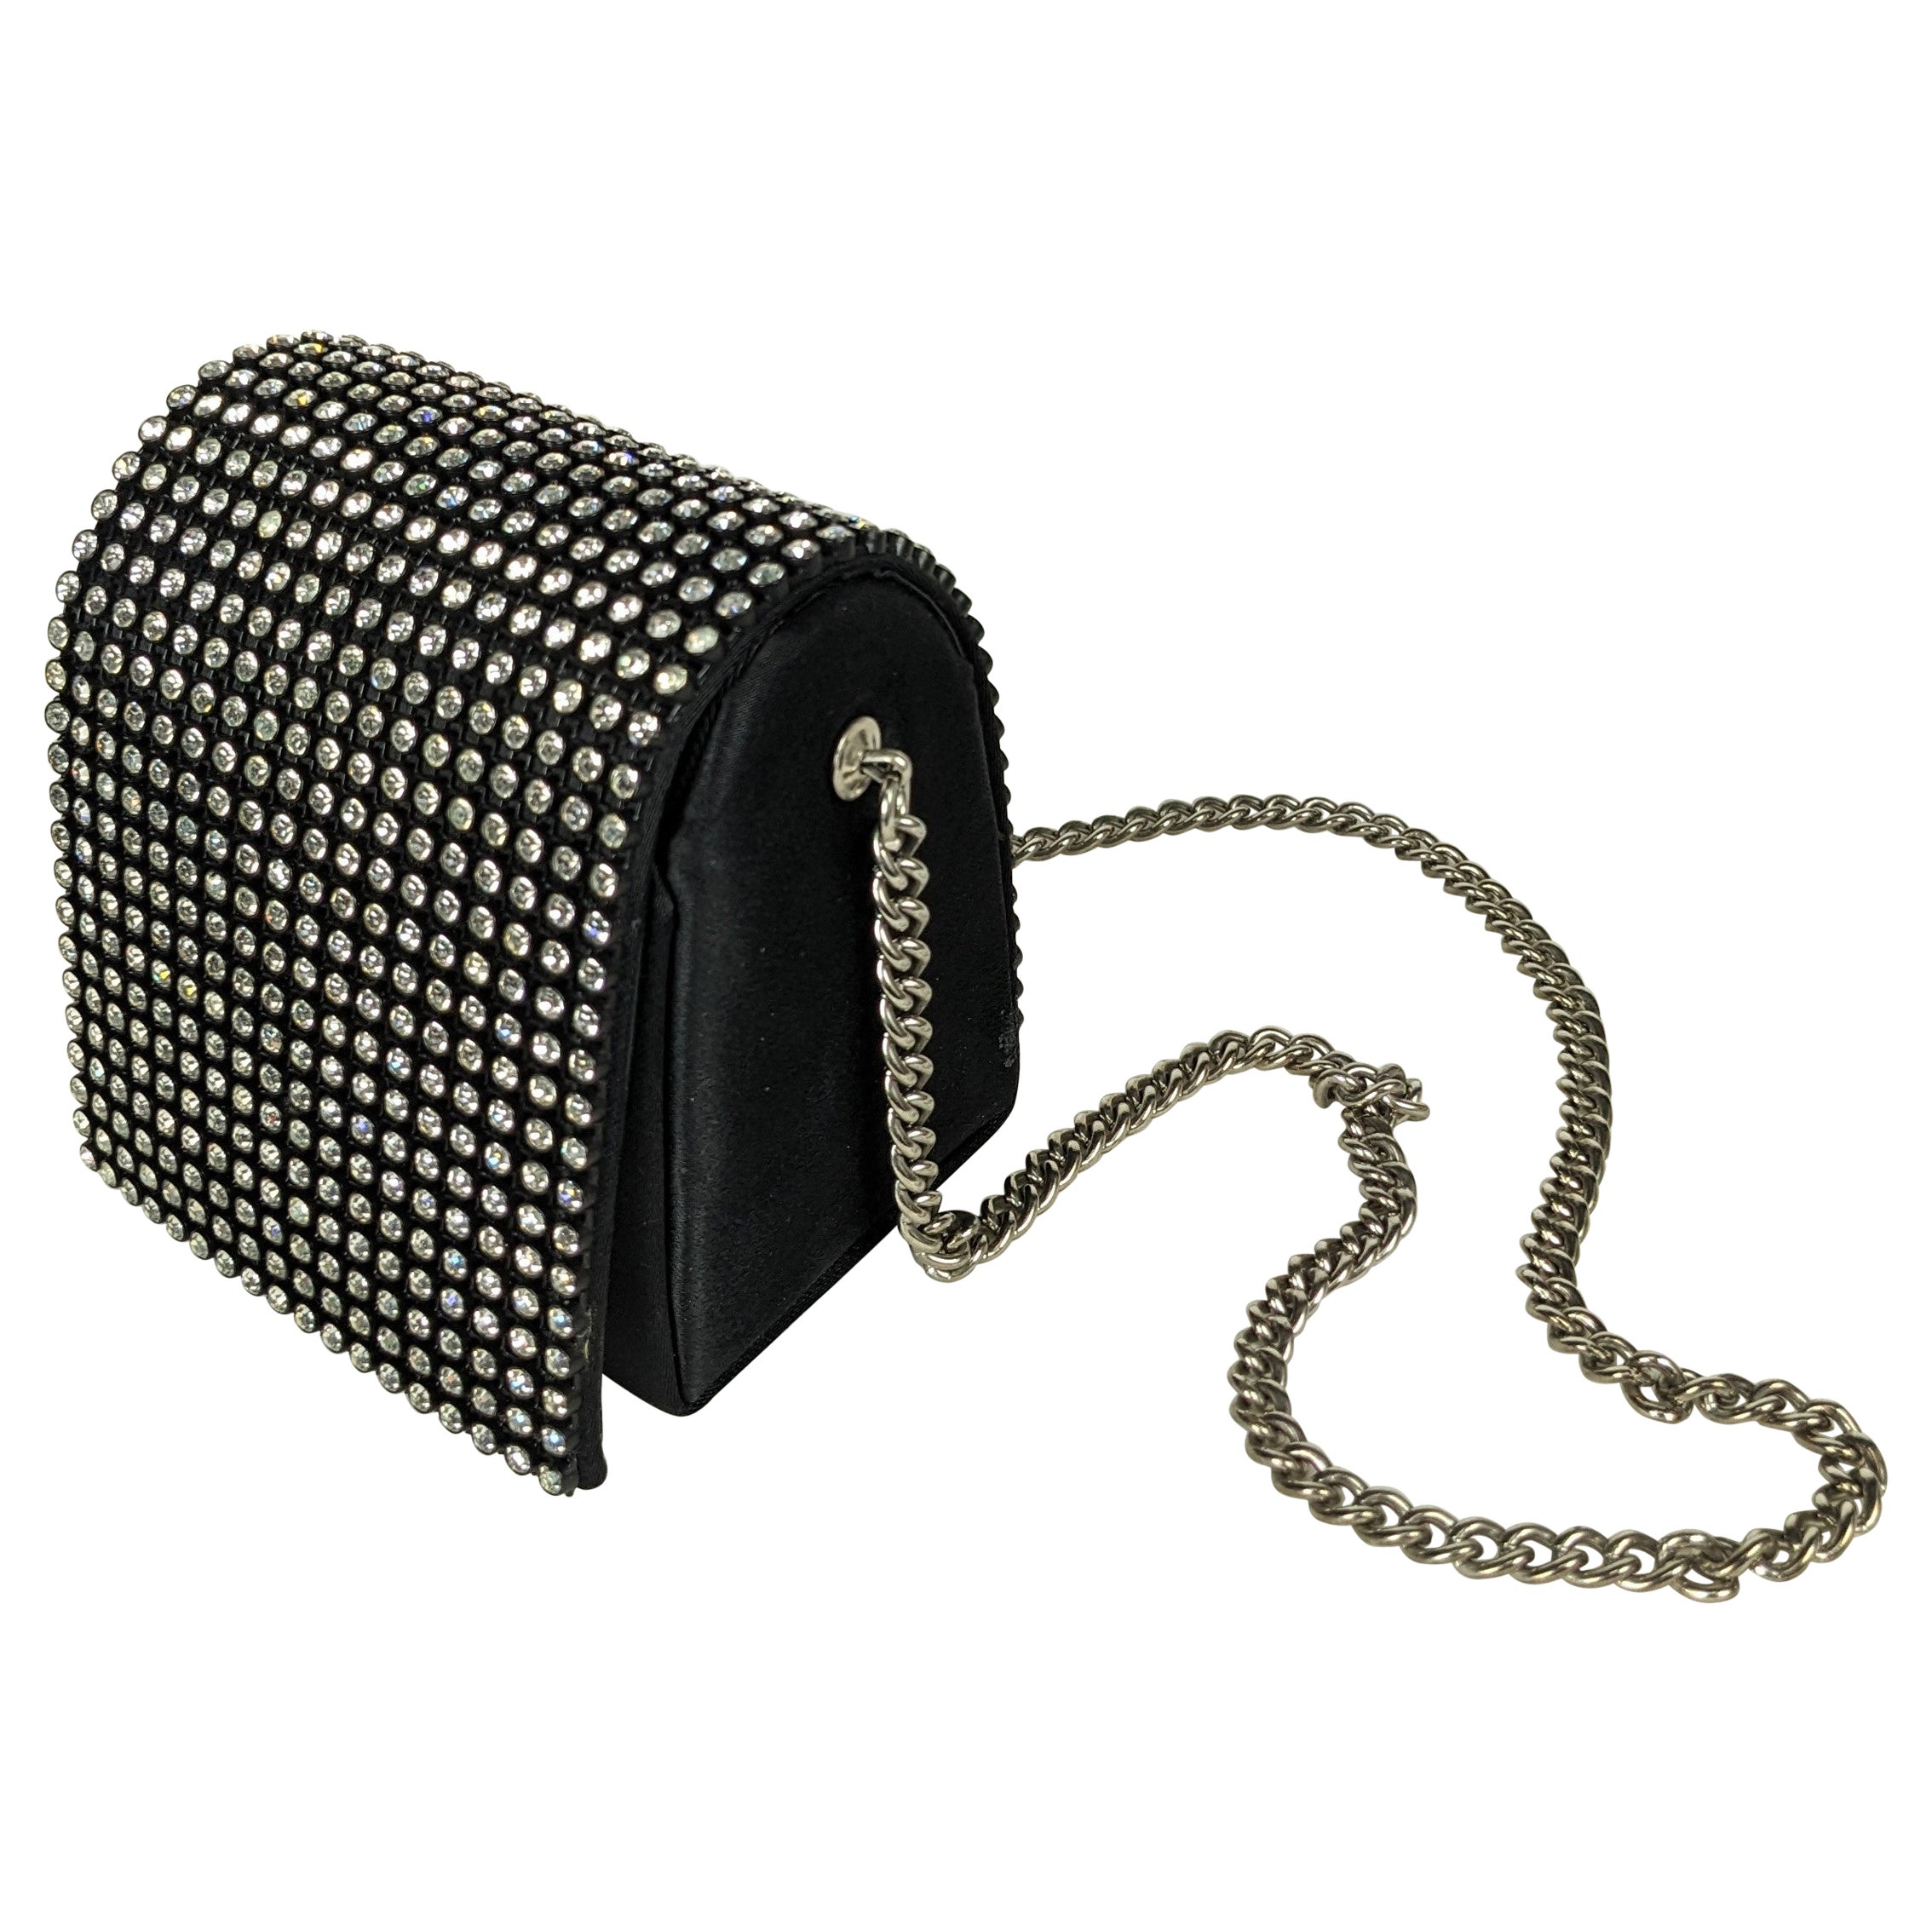 Arnold Scassi Pave Cube Novelty Bag For Sale